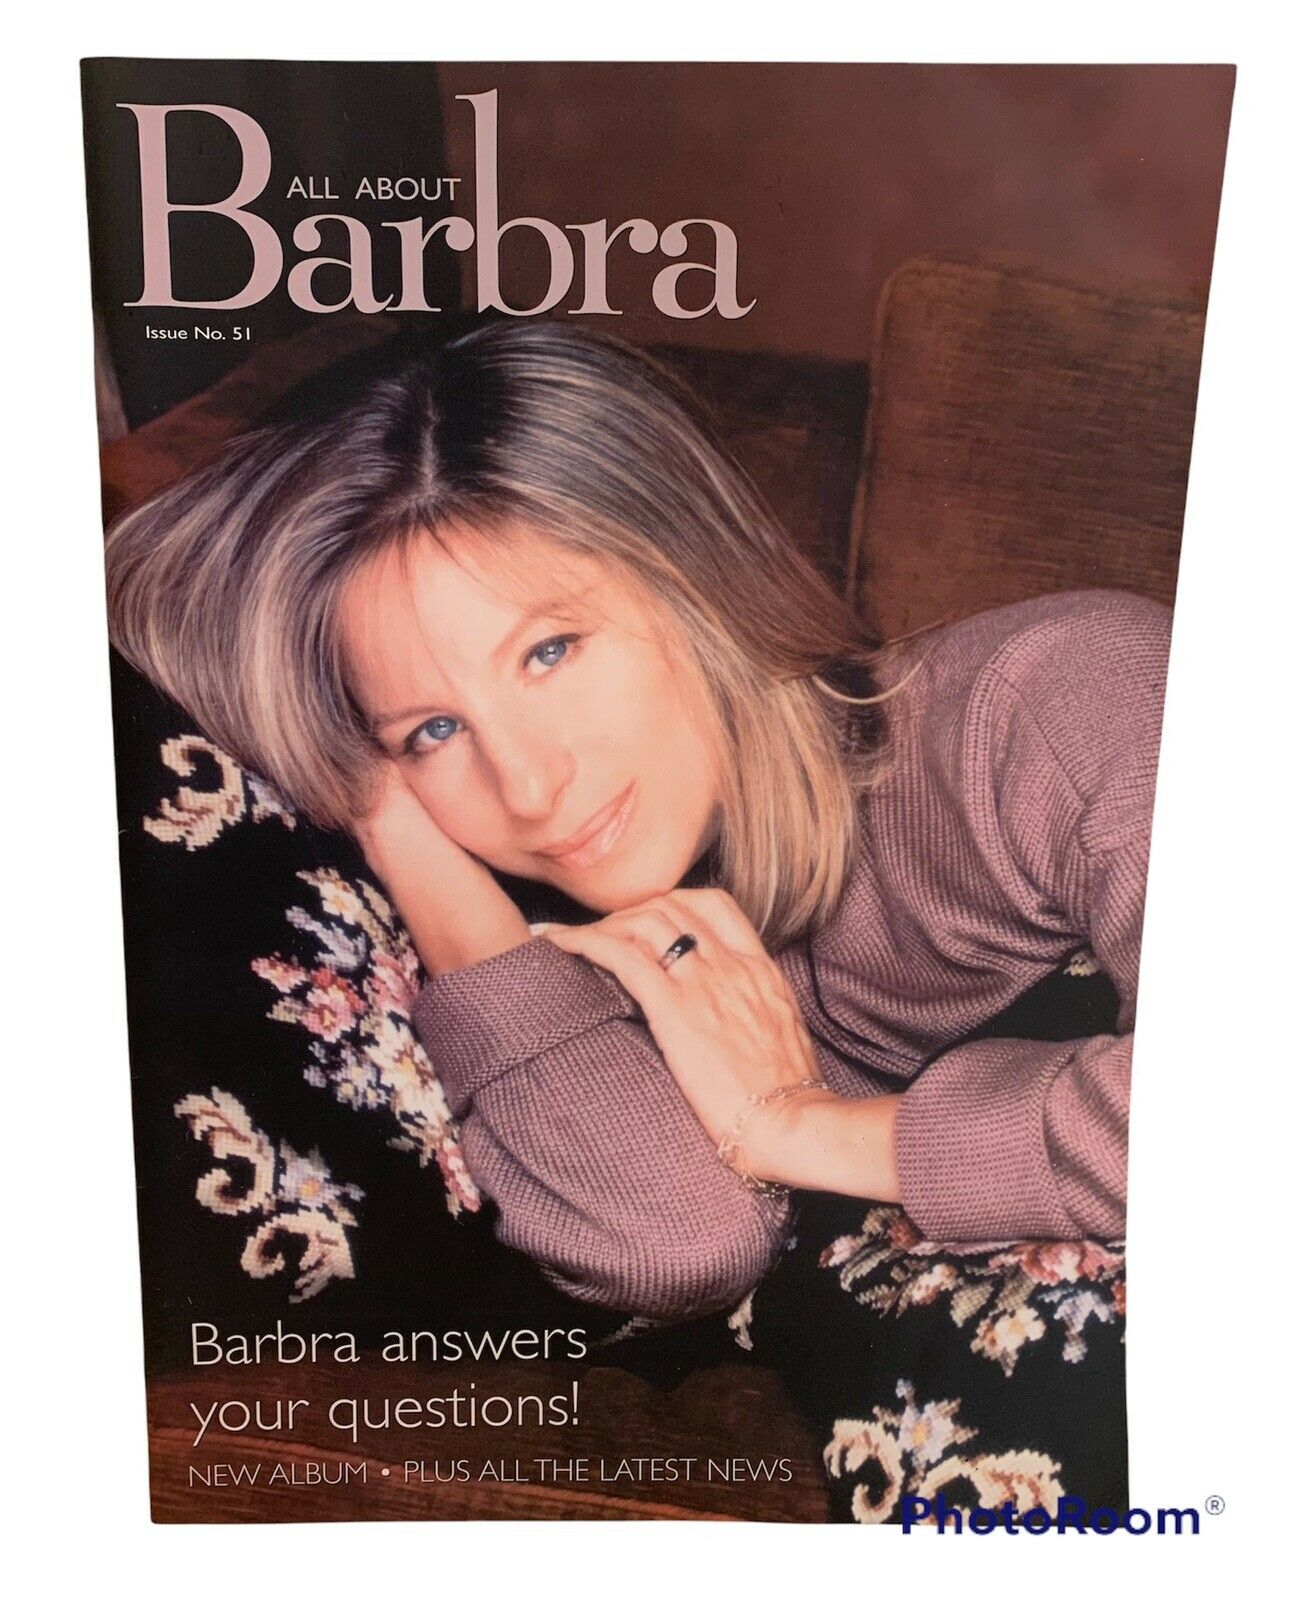 Barbra Streisand Fan Magazine All About Barbra #51 UK Published 1999 Q&A's